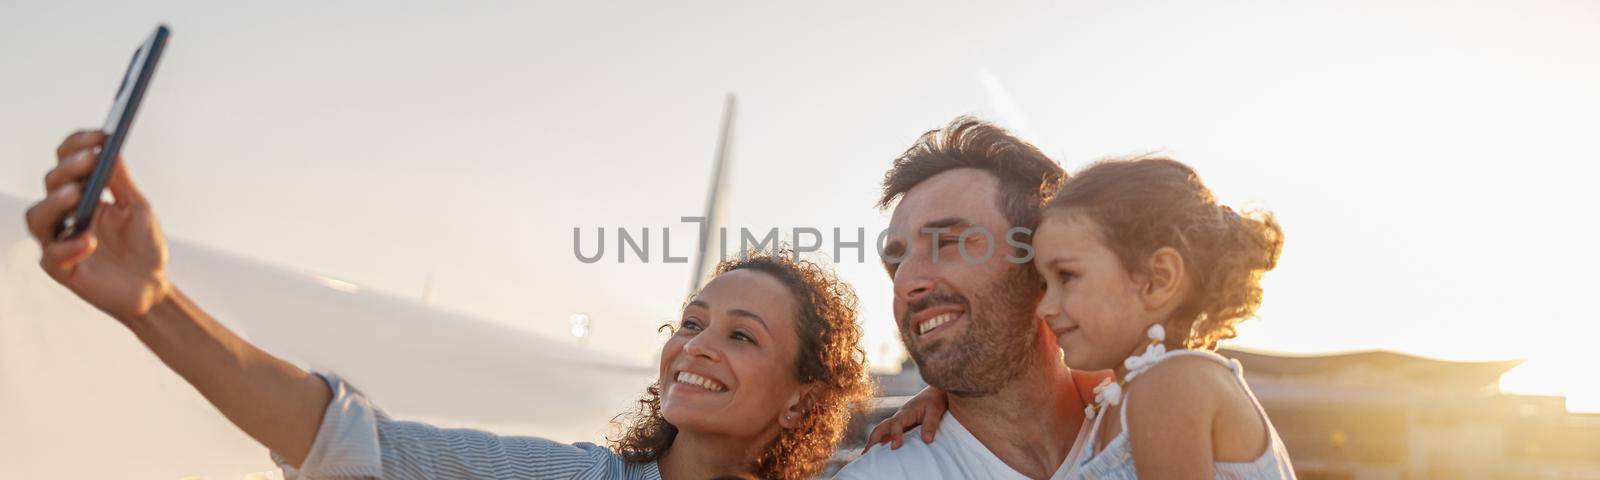 Happy tourists, beautiful family taking selfie while standing together outdoors ready for boarding the plane at sunset by Yaroslav_astakhov